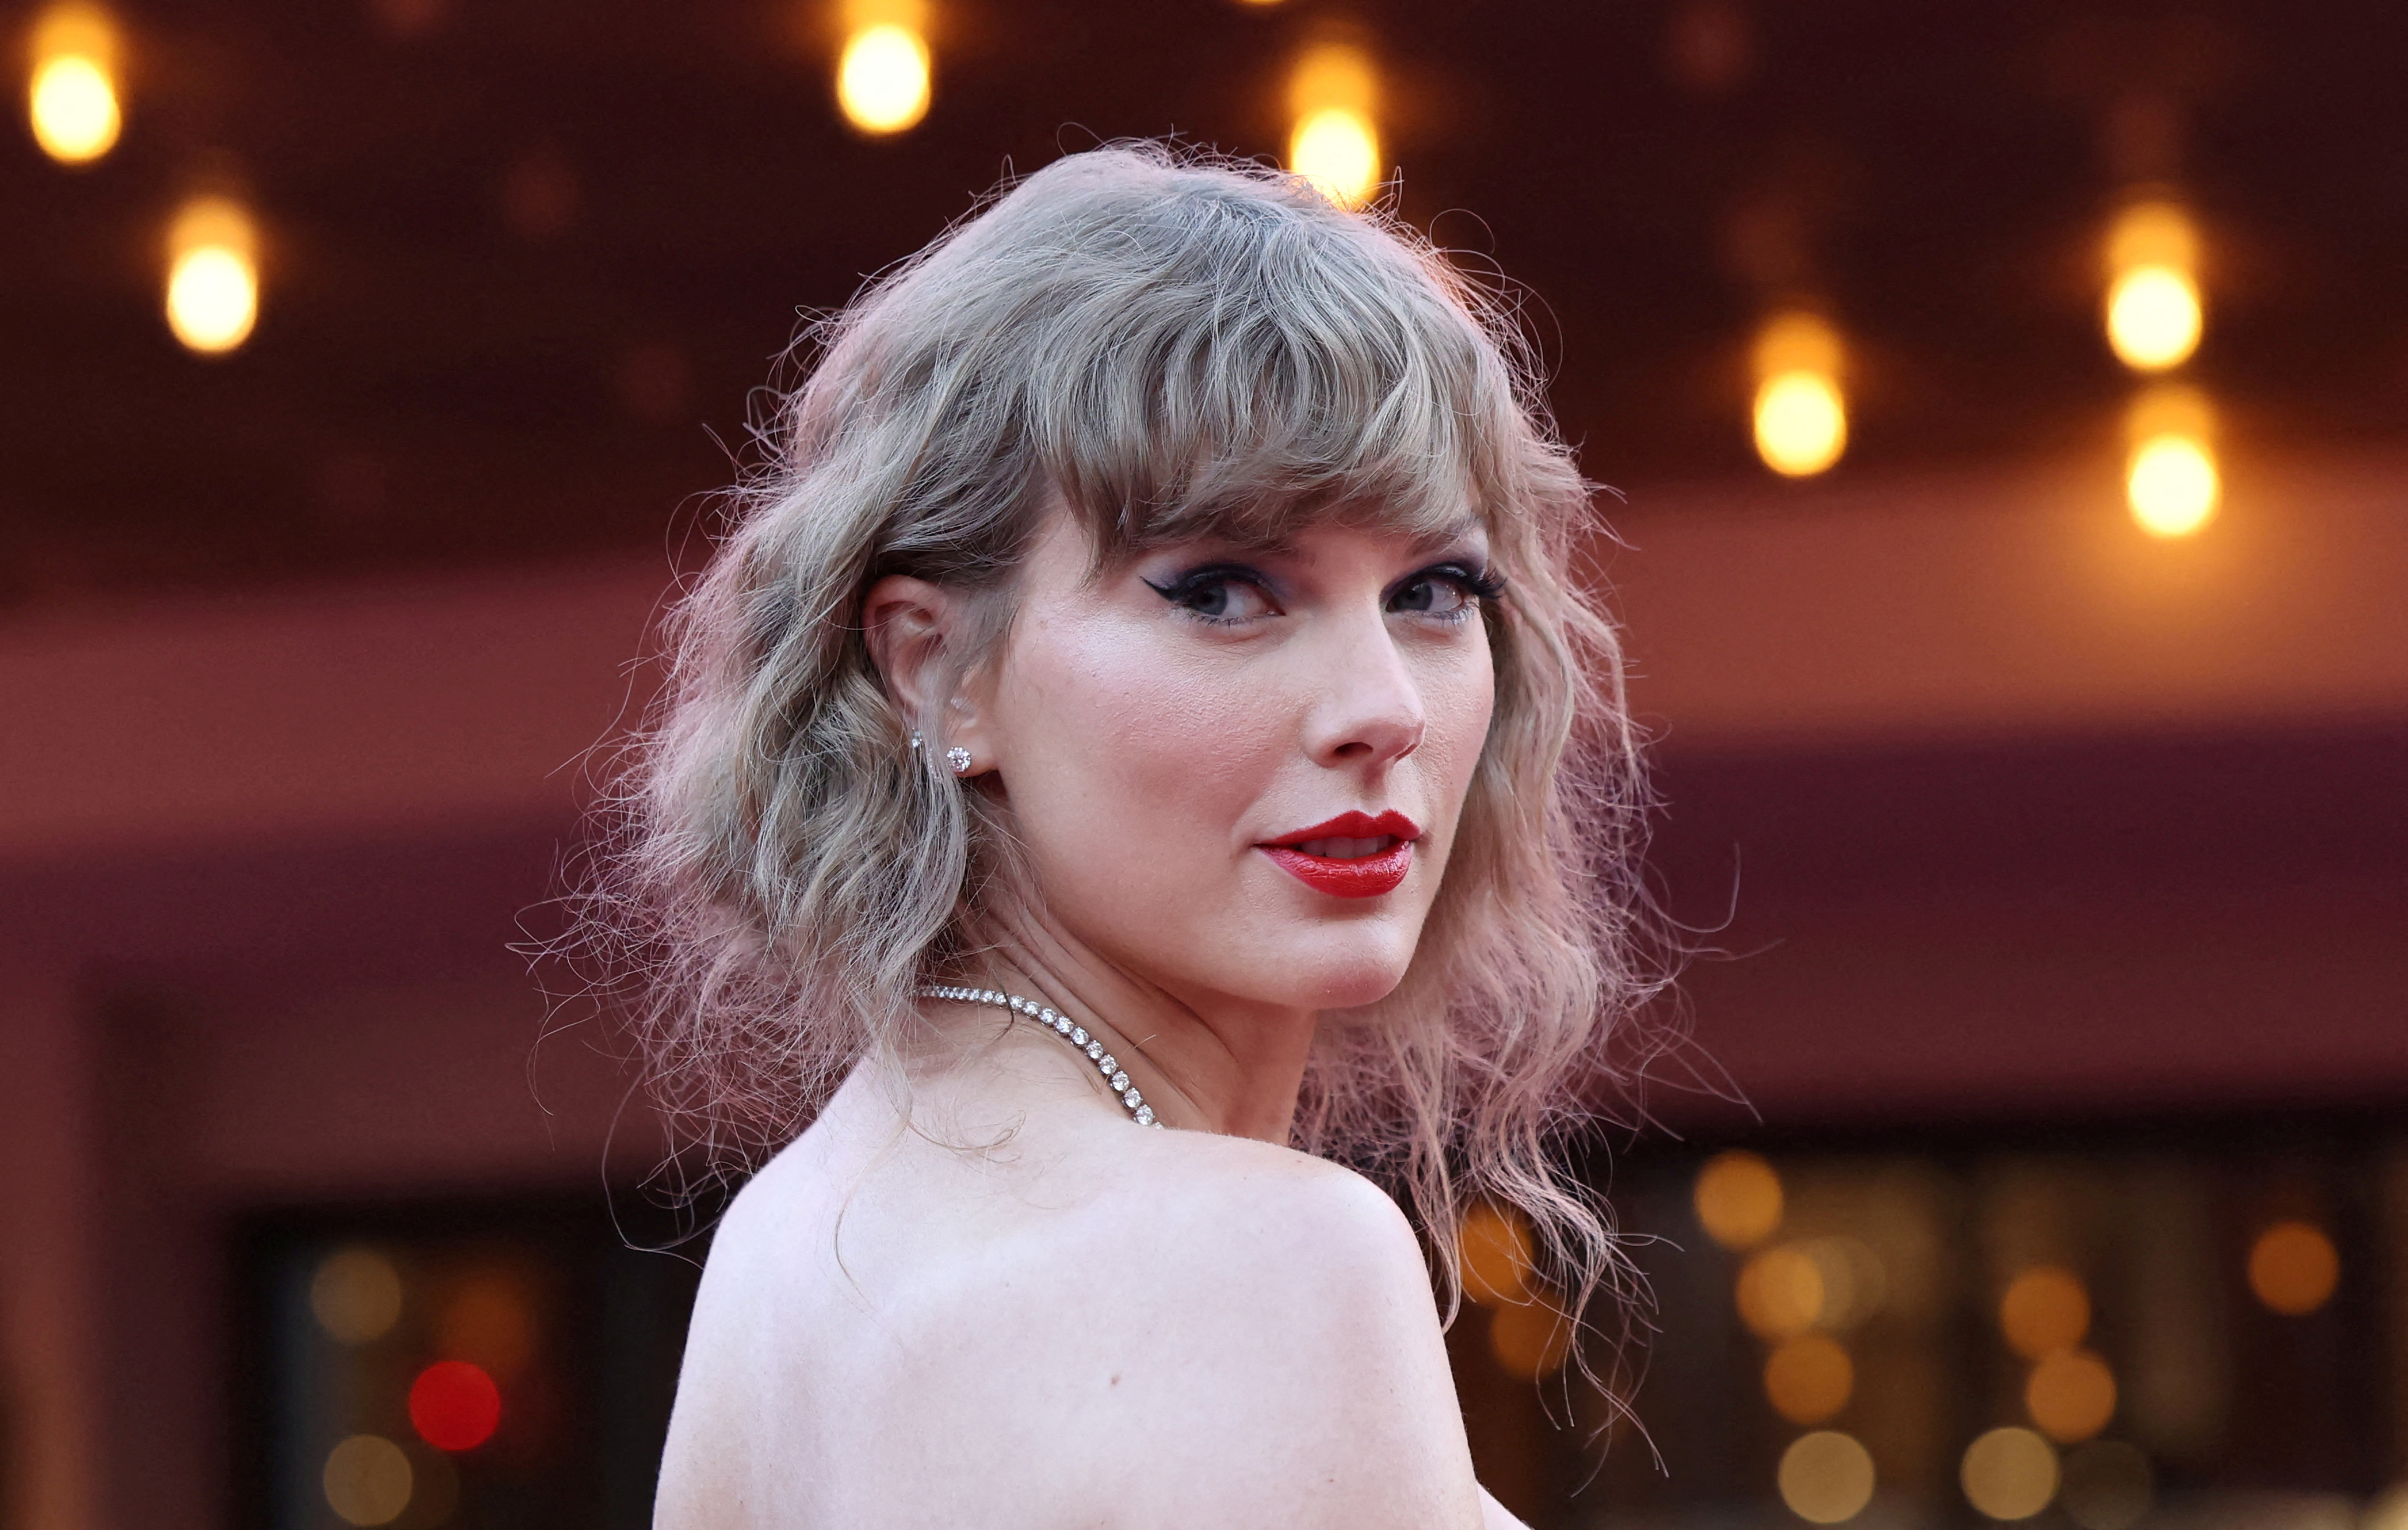 Taylor Swift attends a premiere for Taylor Swift: The Eras Tour in Los Angeles